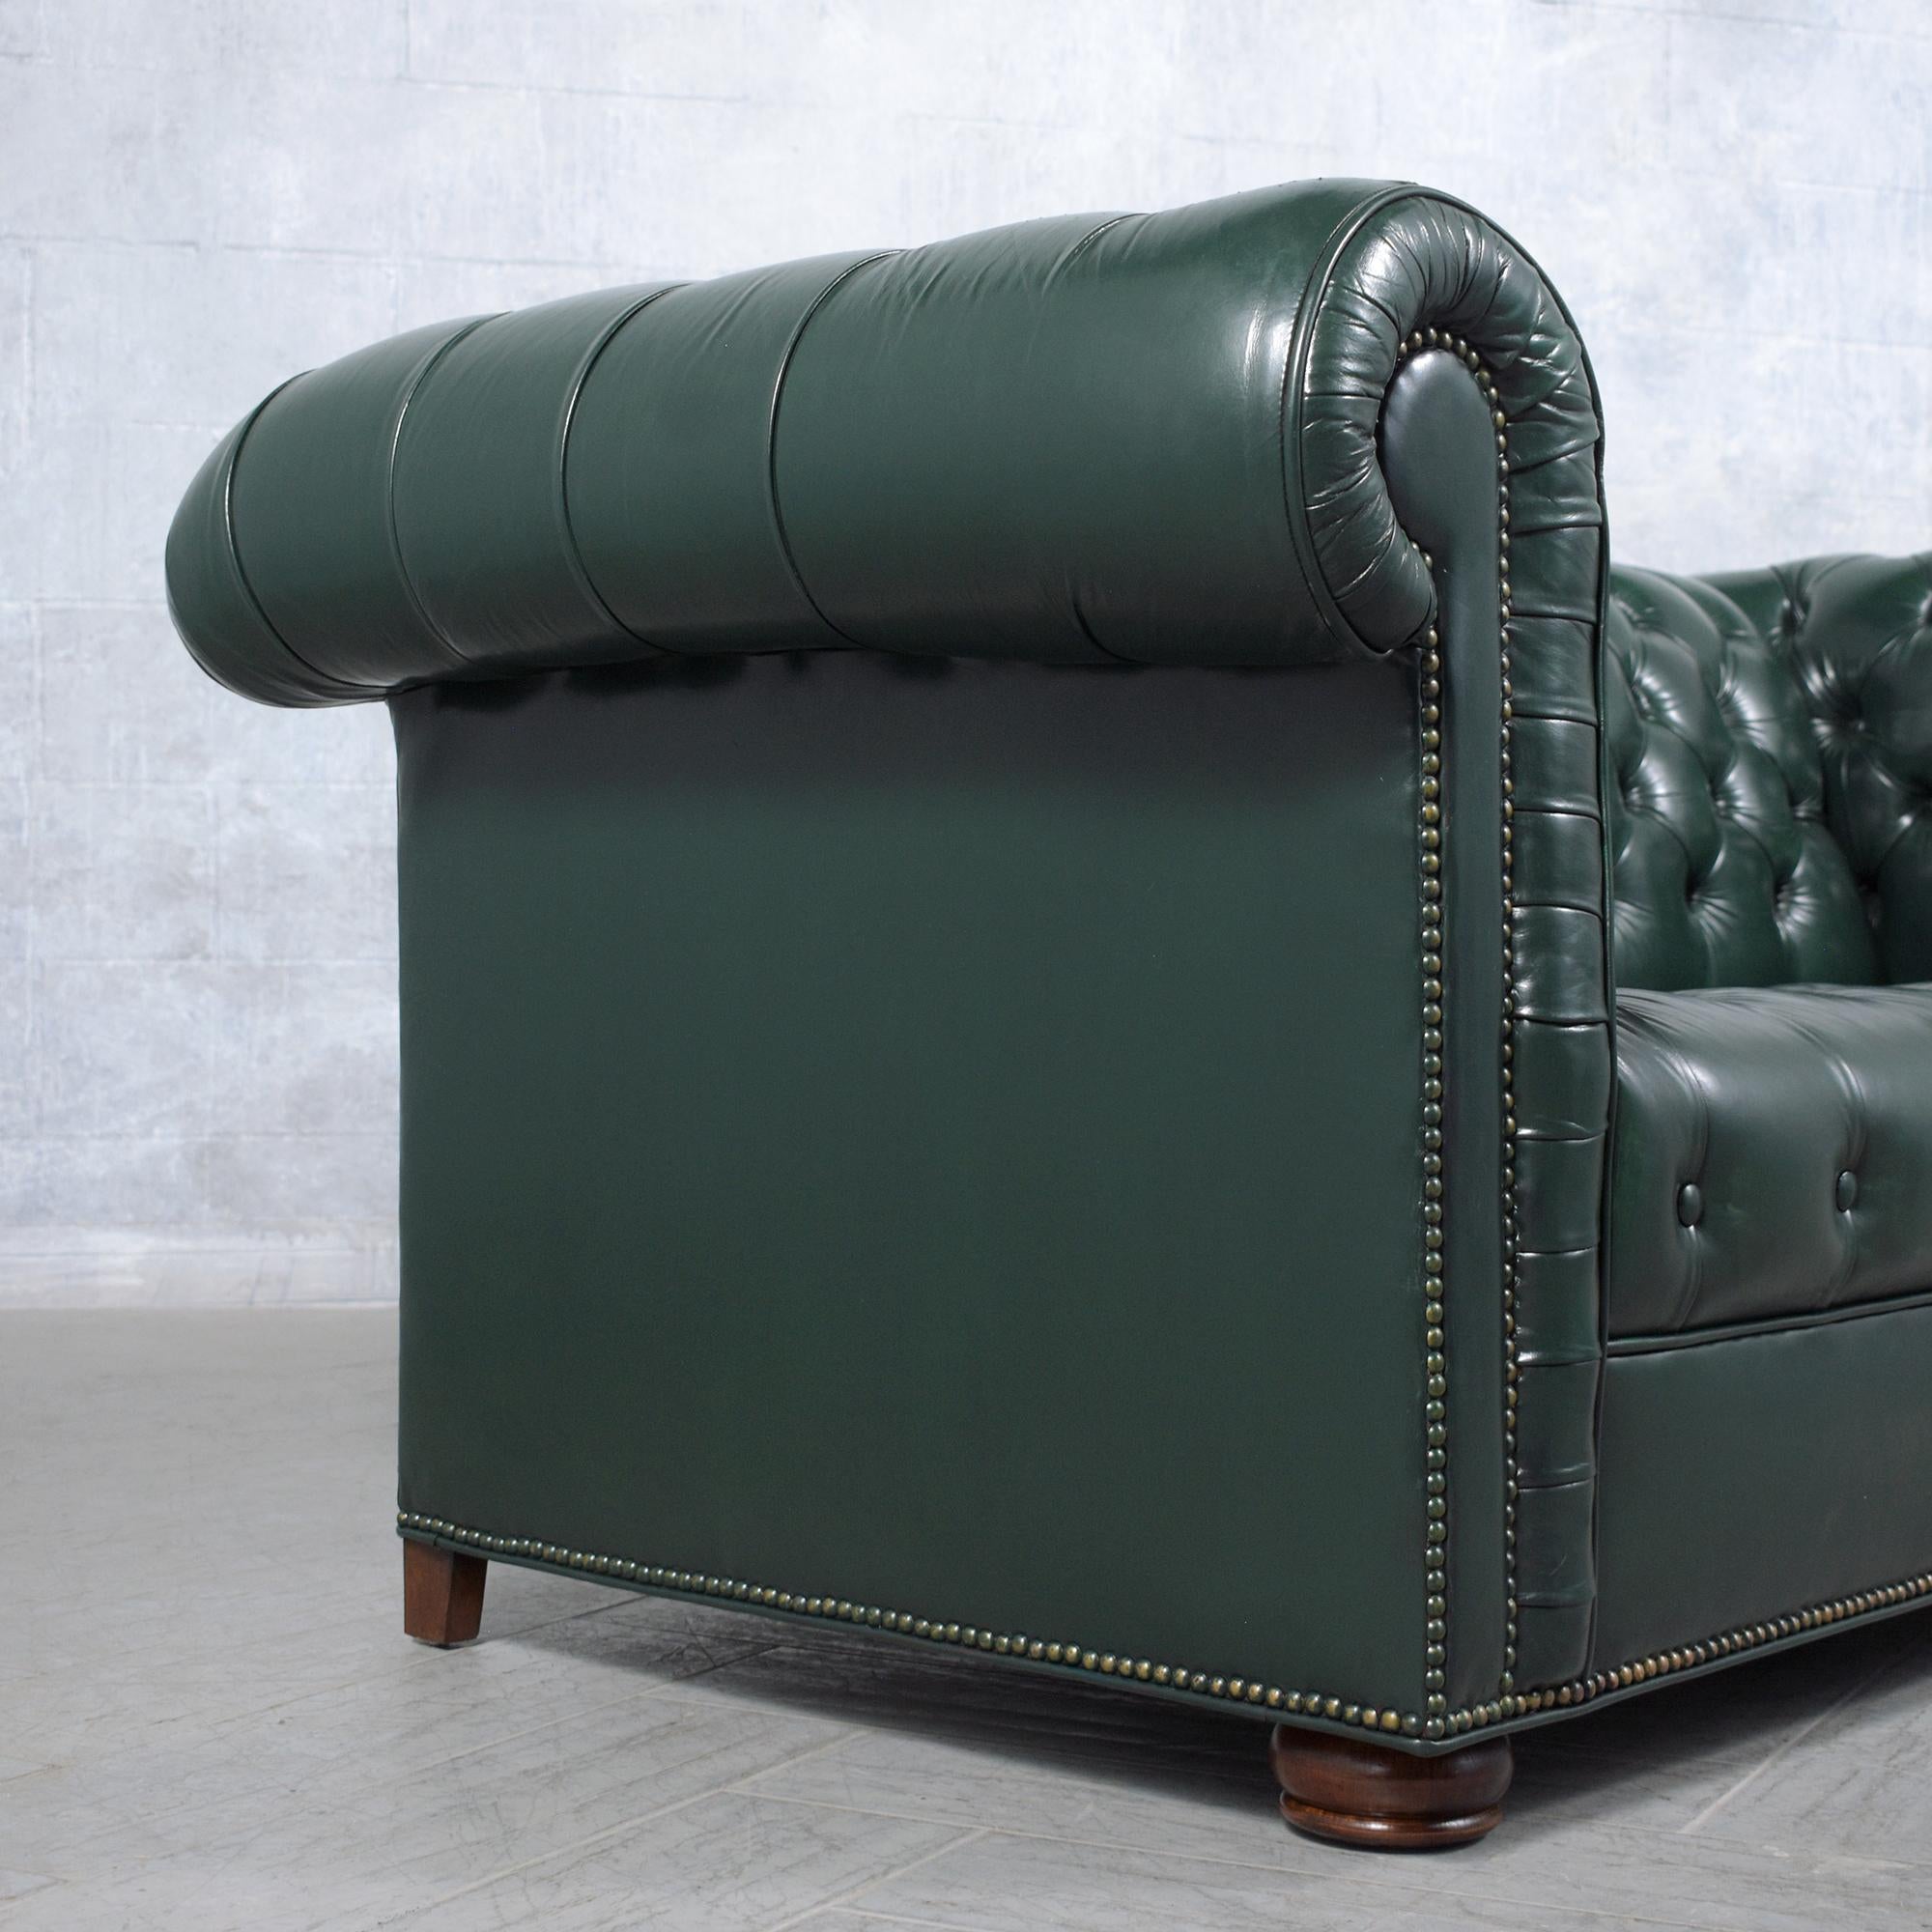 1970s Vintage Chesterfield Sofa: Emerald Green Leather with Elegant Carved Legs 4